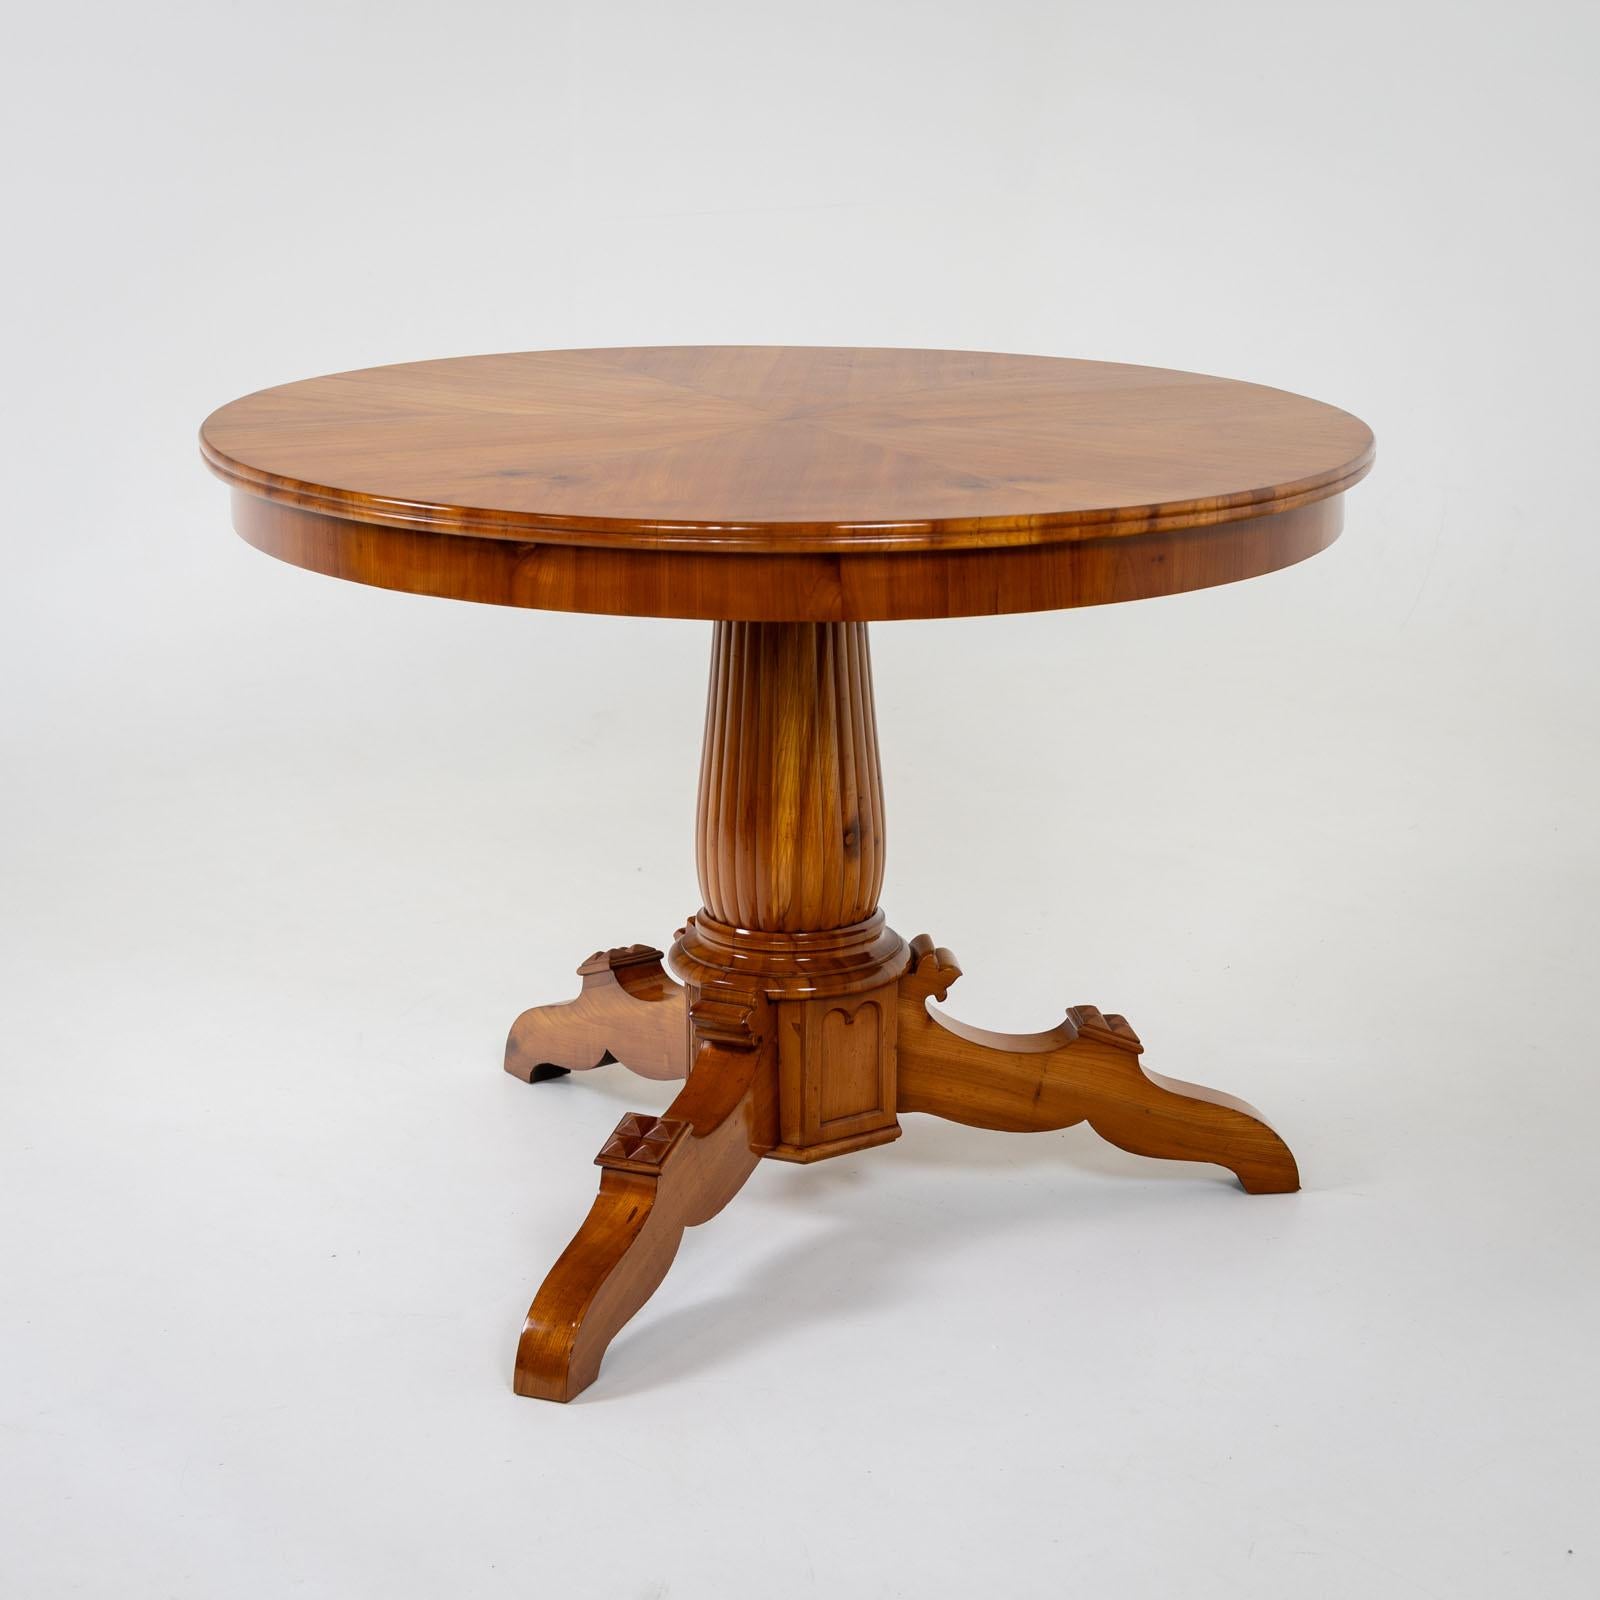 Cherry center table on three curved legs with carved stud decoration and a conical central column with grooved decoration. The round table top is veneered in segments and profiled at the edge. The table has been restored and polished by hand.